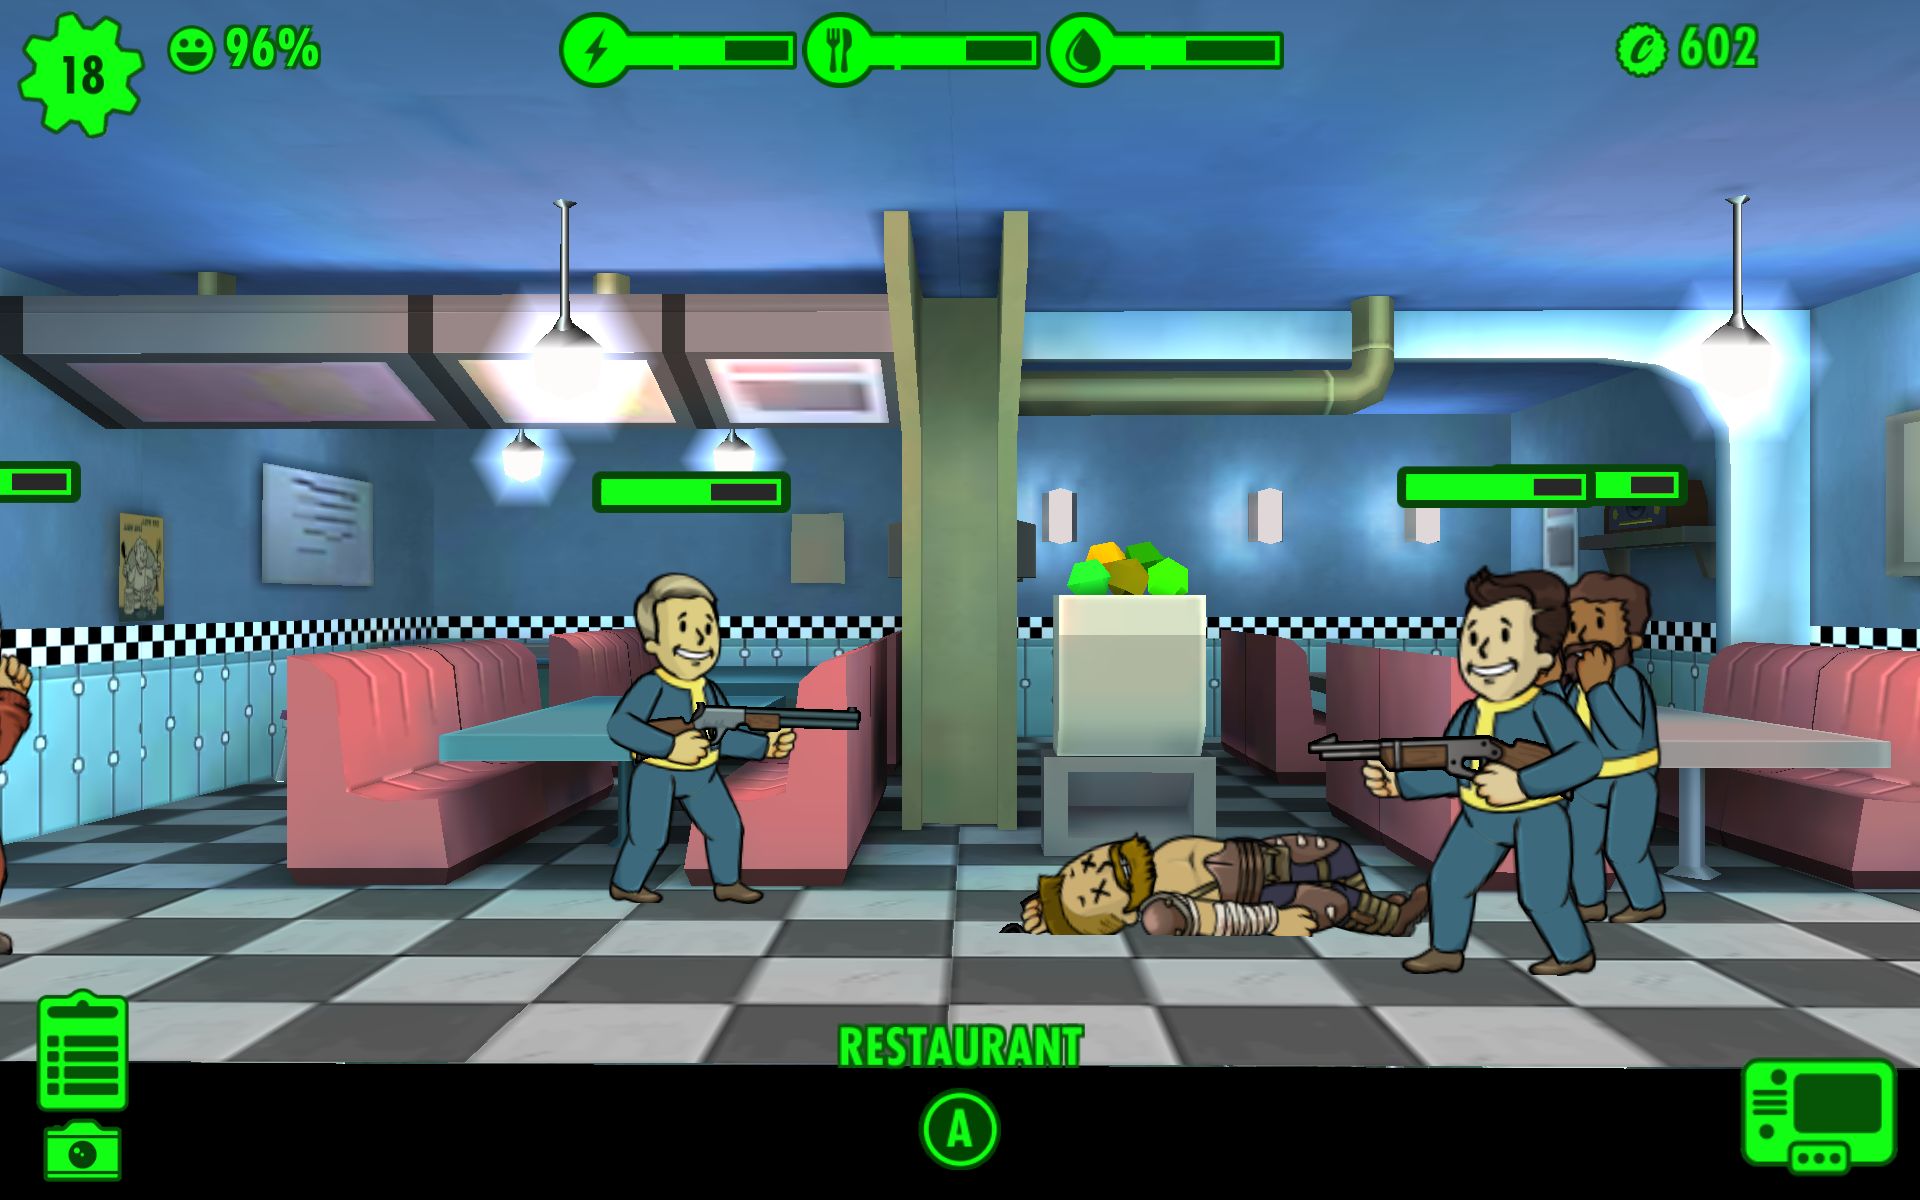 best weapon in fallout shelter?